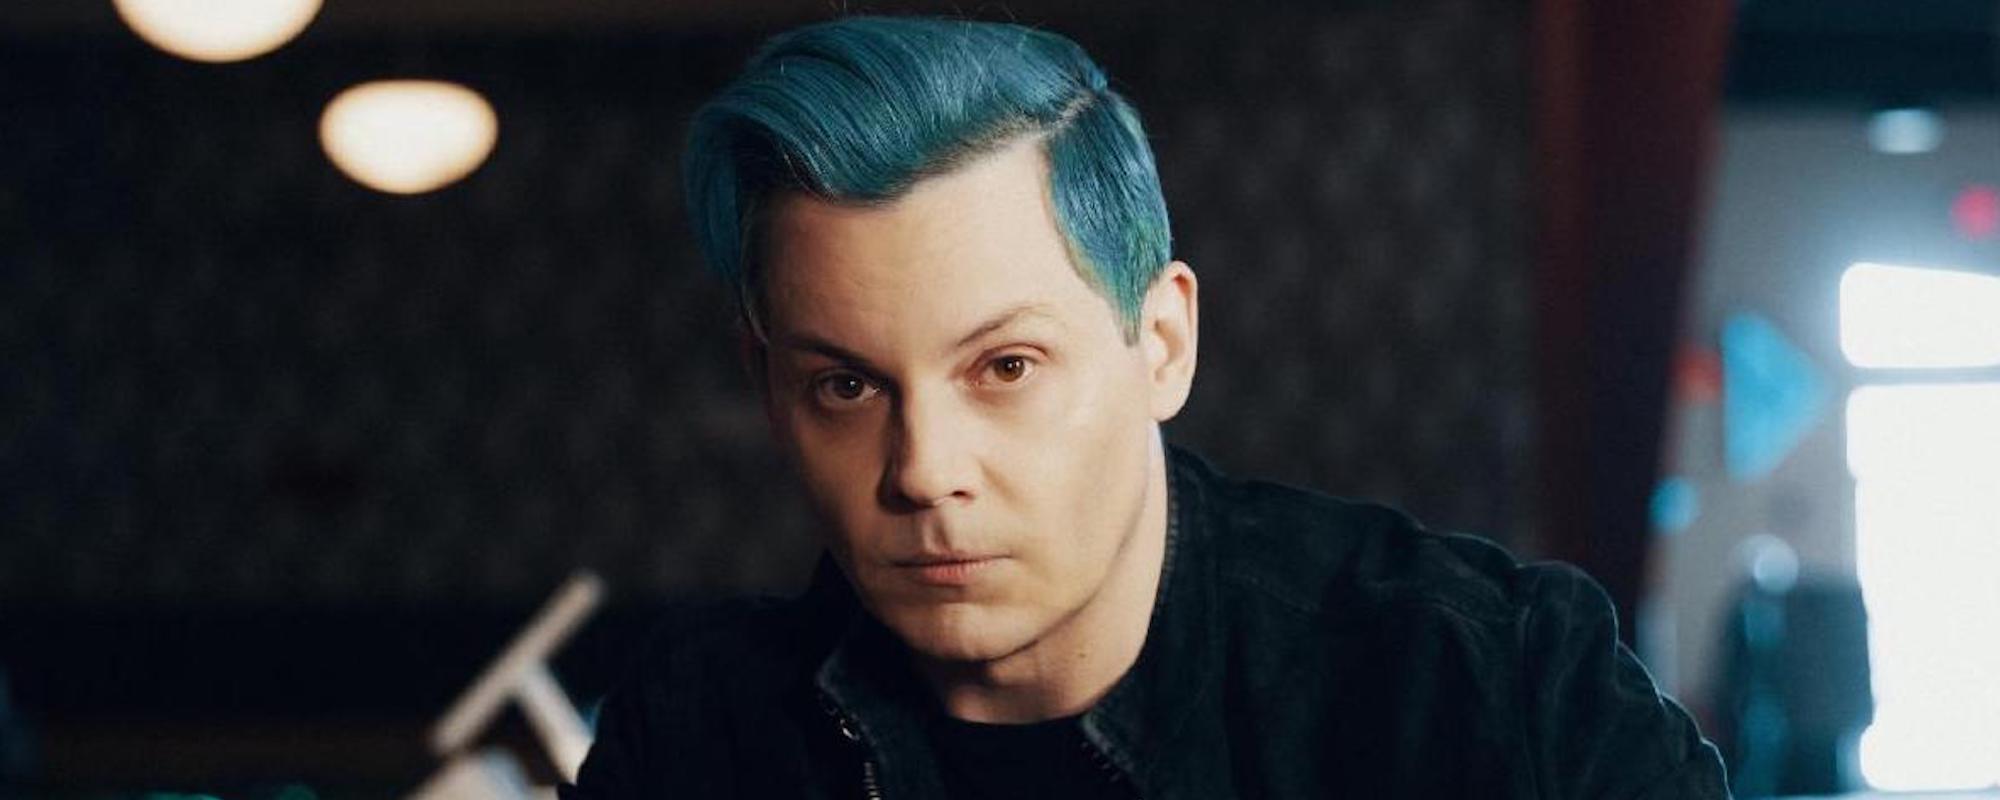 Jack White Quits Twitter in Light of Trump’s Reinstatement: “Absolutely Disgusting”